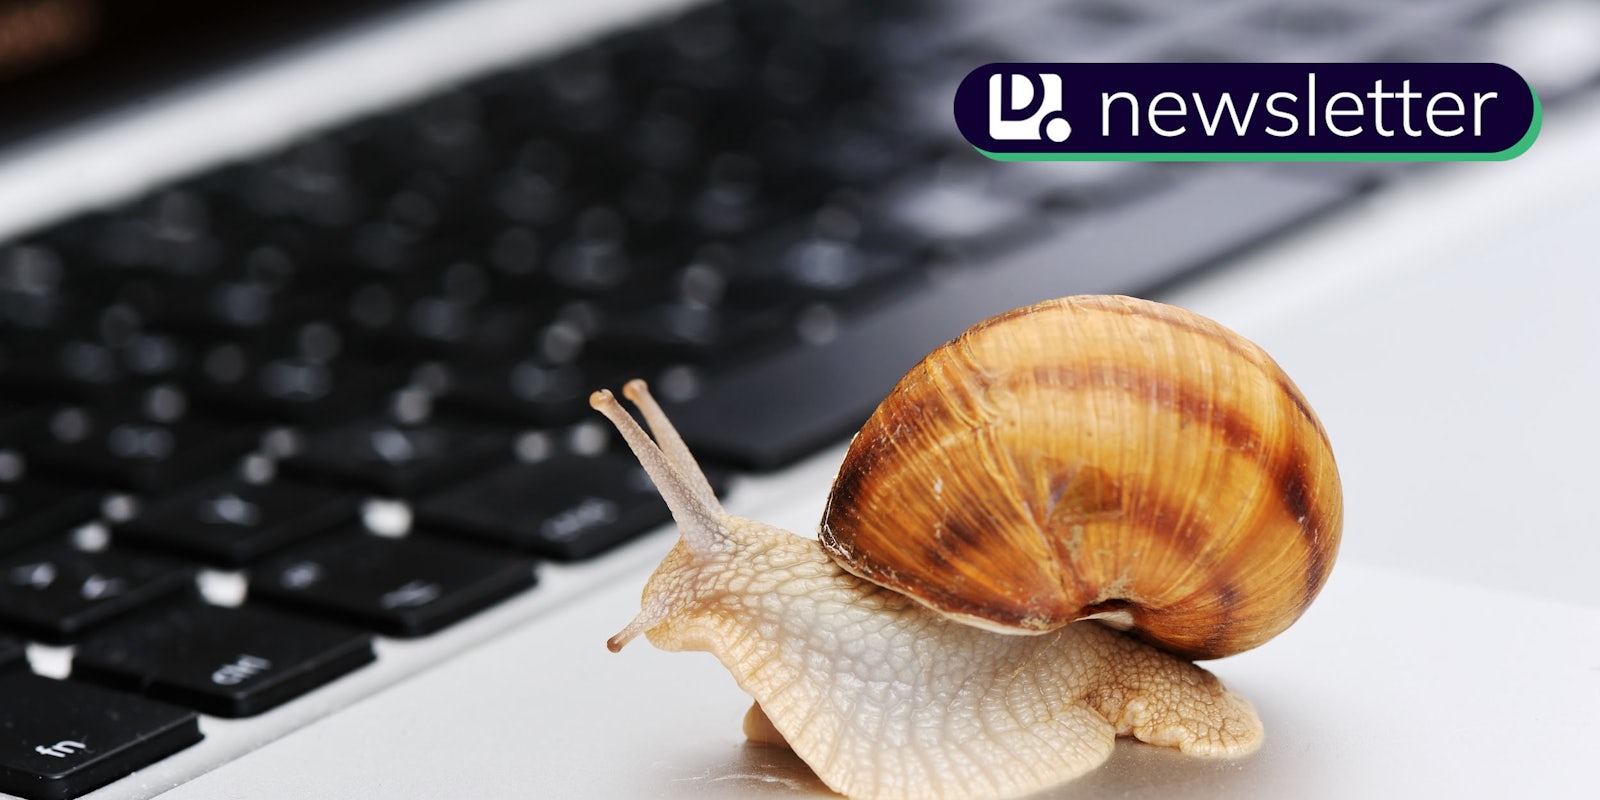 A snail next to a computer keyboard. The Daily Dot newsletter logo is in the top right corner.